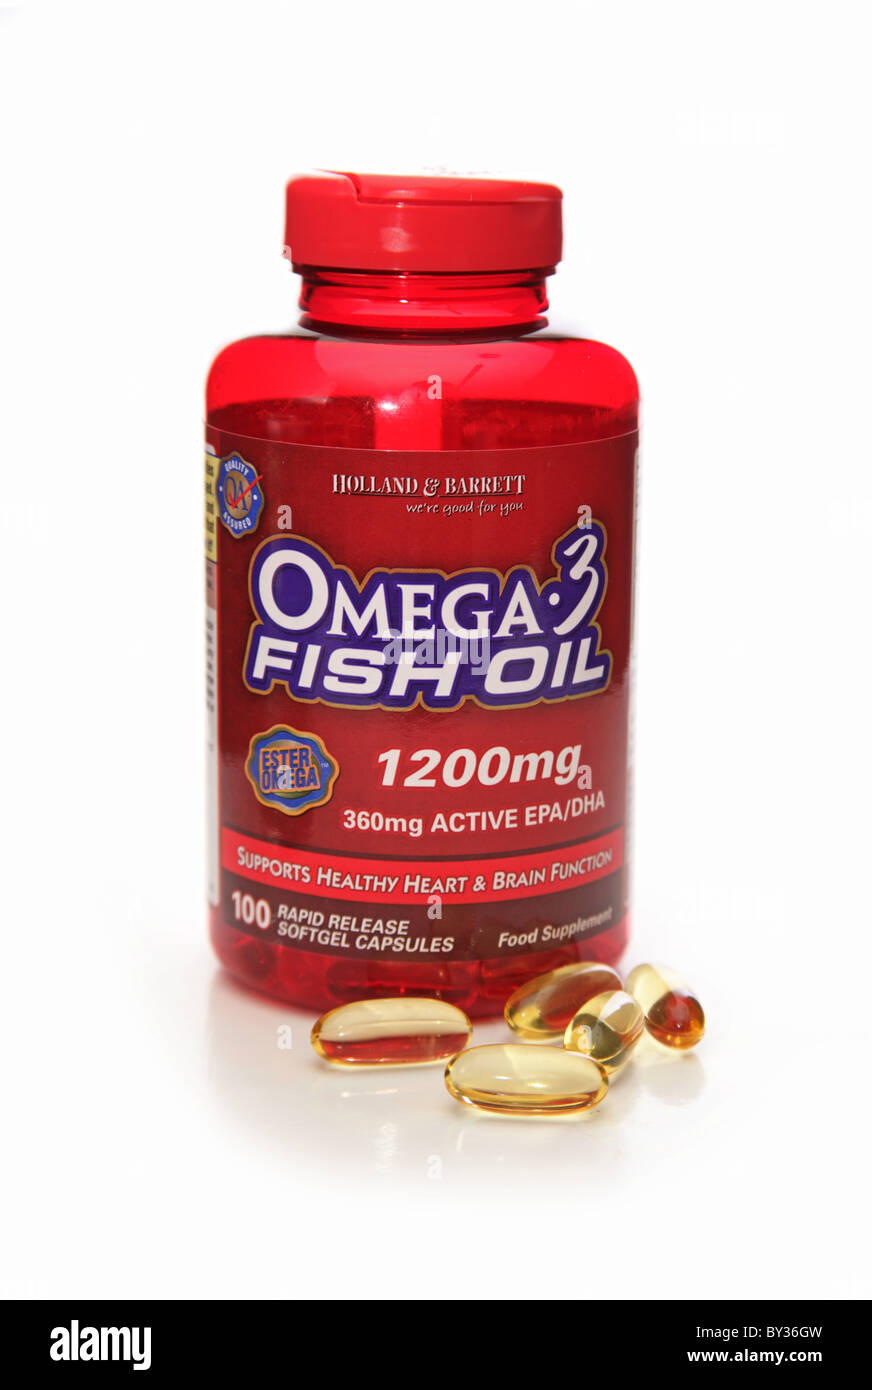 Holland and Barrett brand Omega 3 Fish Oil Capsules on white background Stock Photo